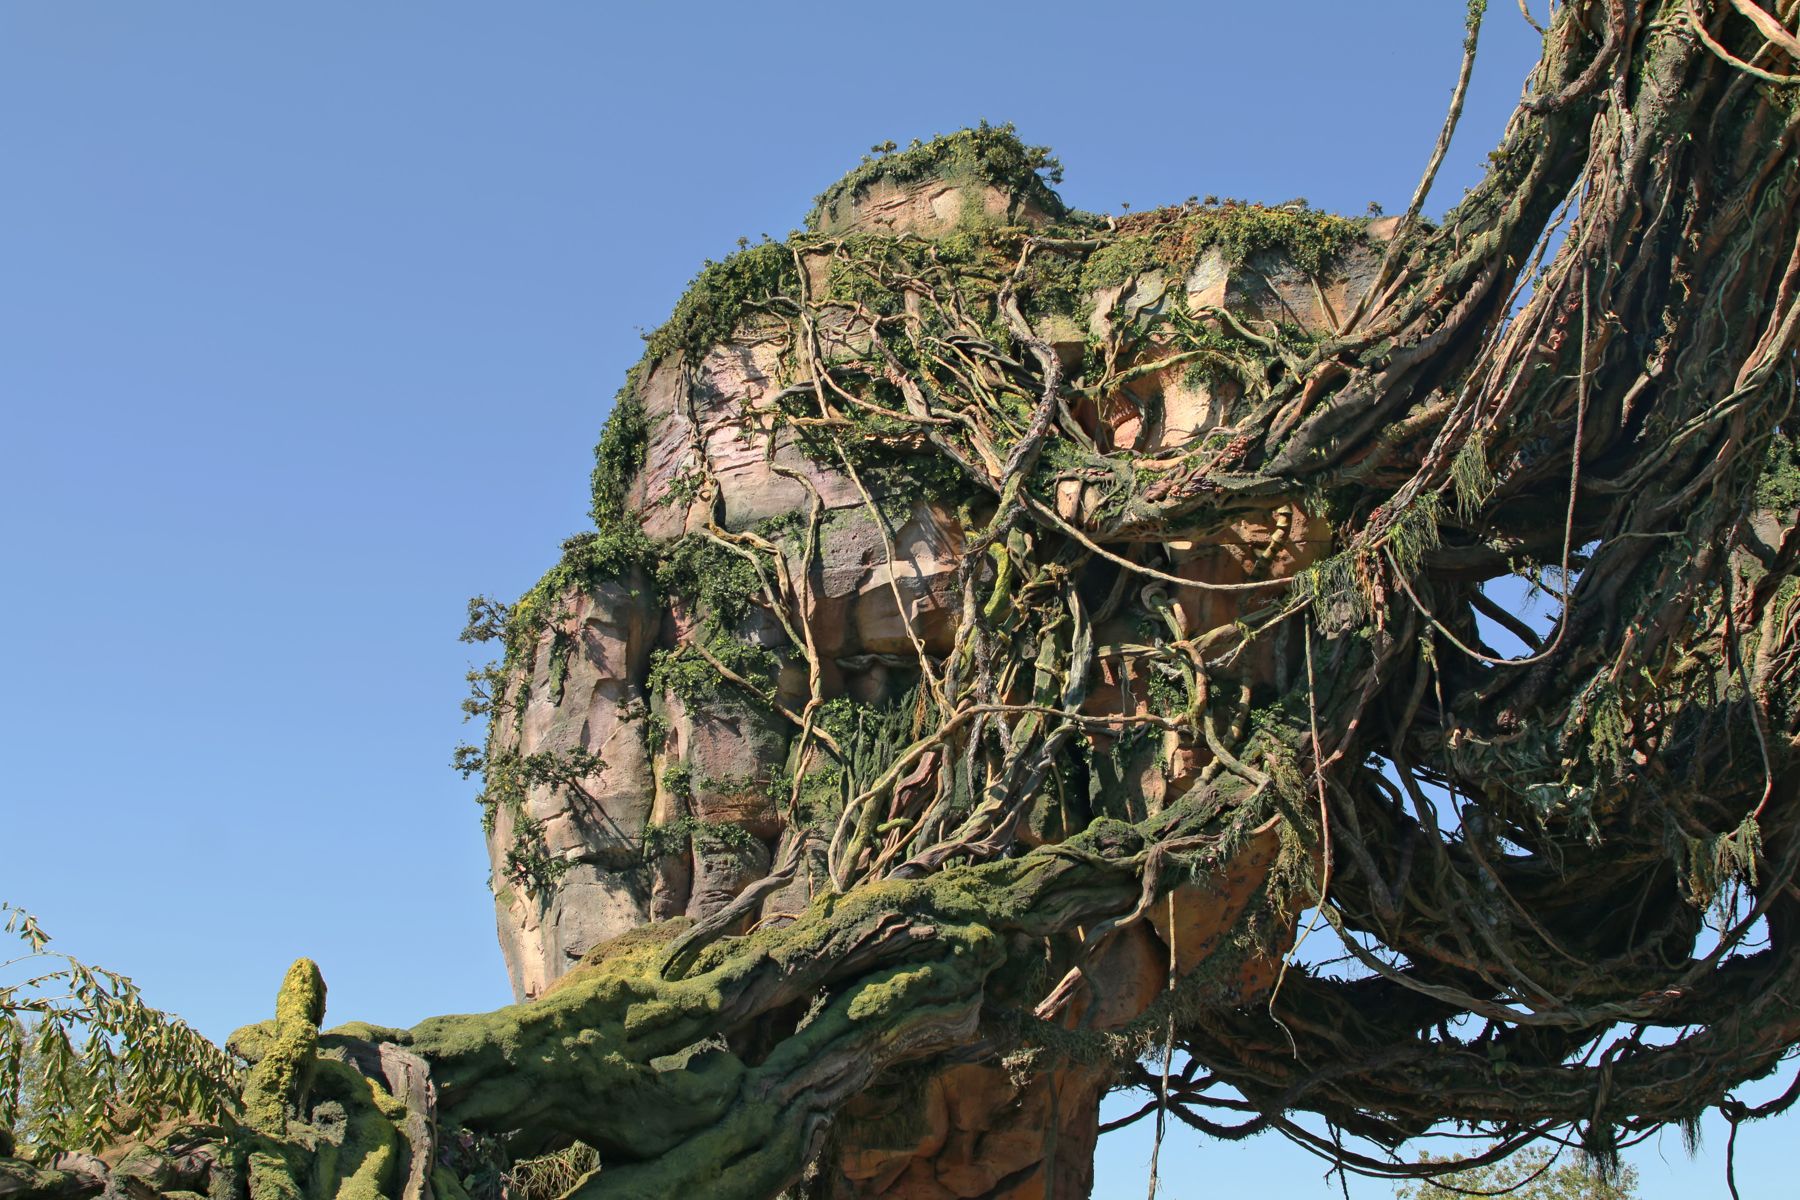 Pandora World of Avatar - Look up at the floating mountain